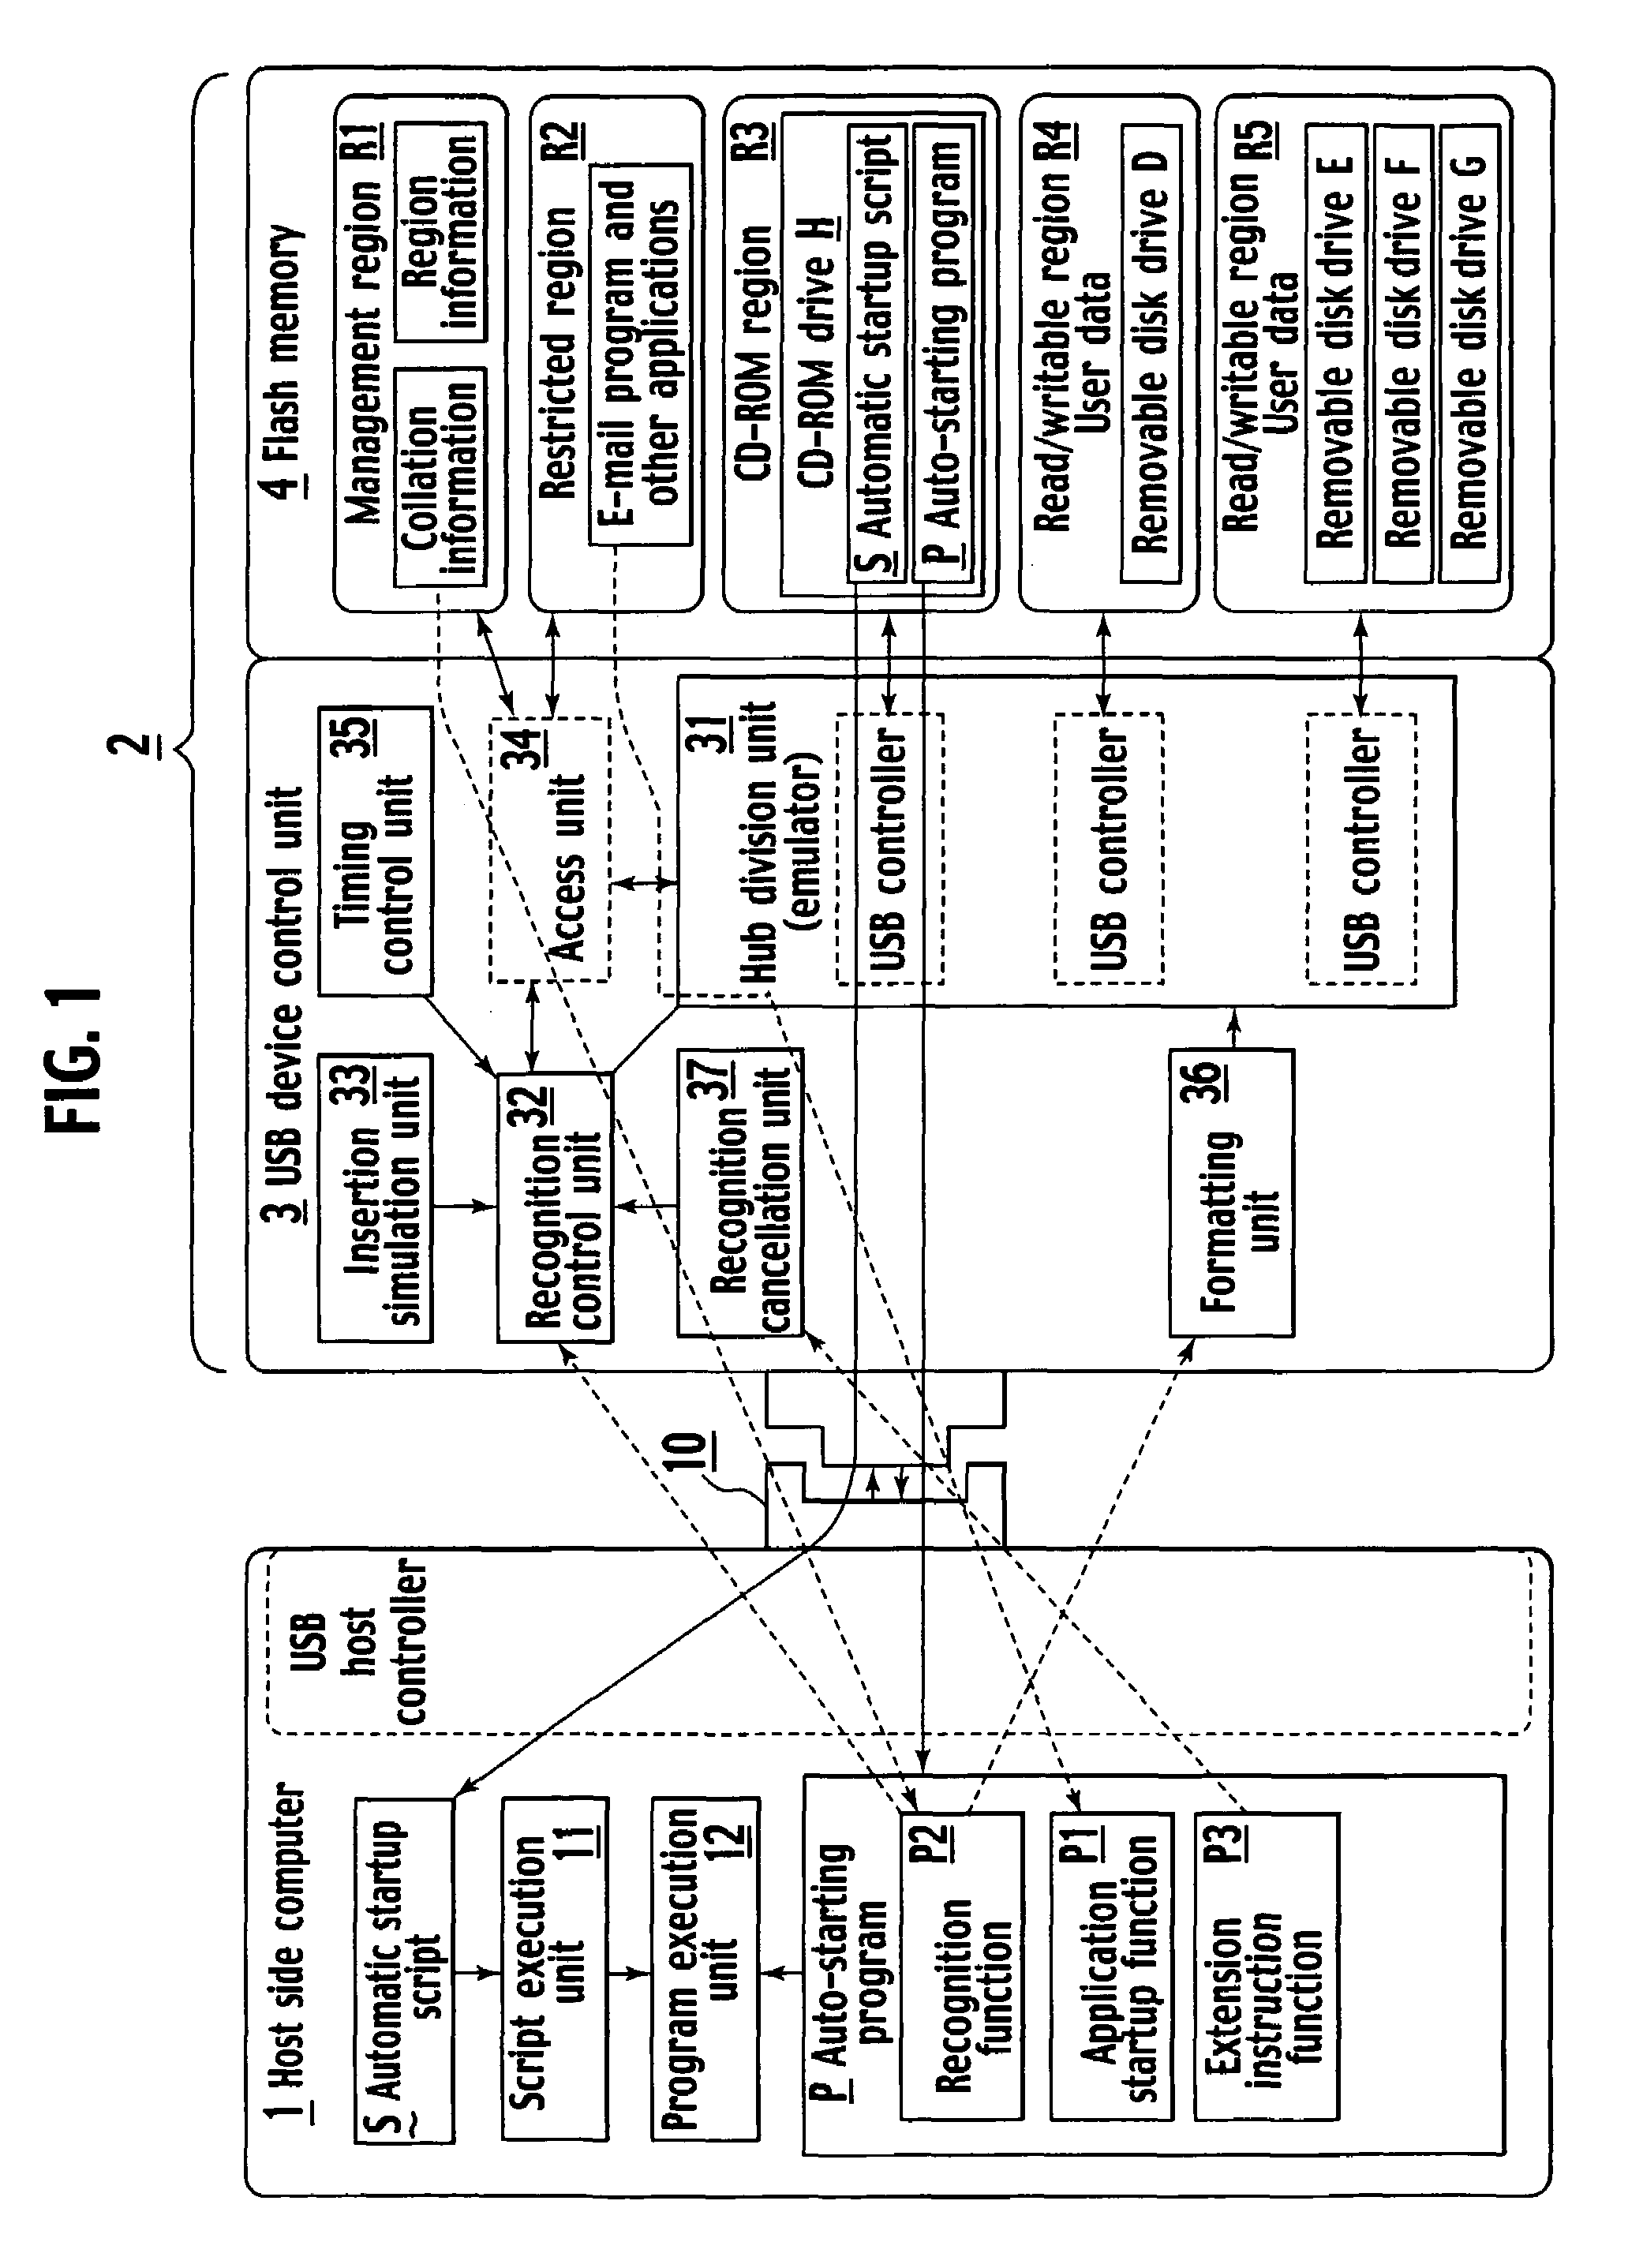 Removable device and control circuit for allowing a medium insertion